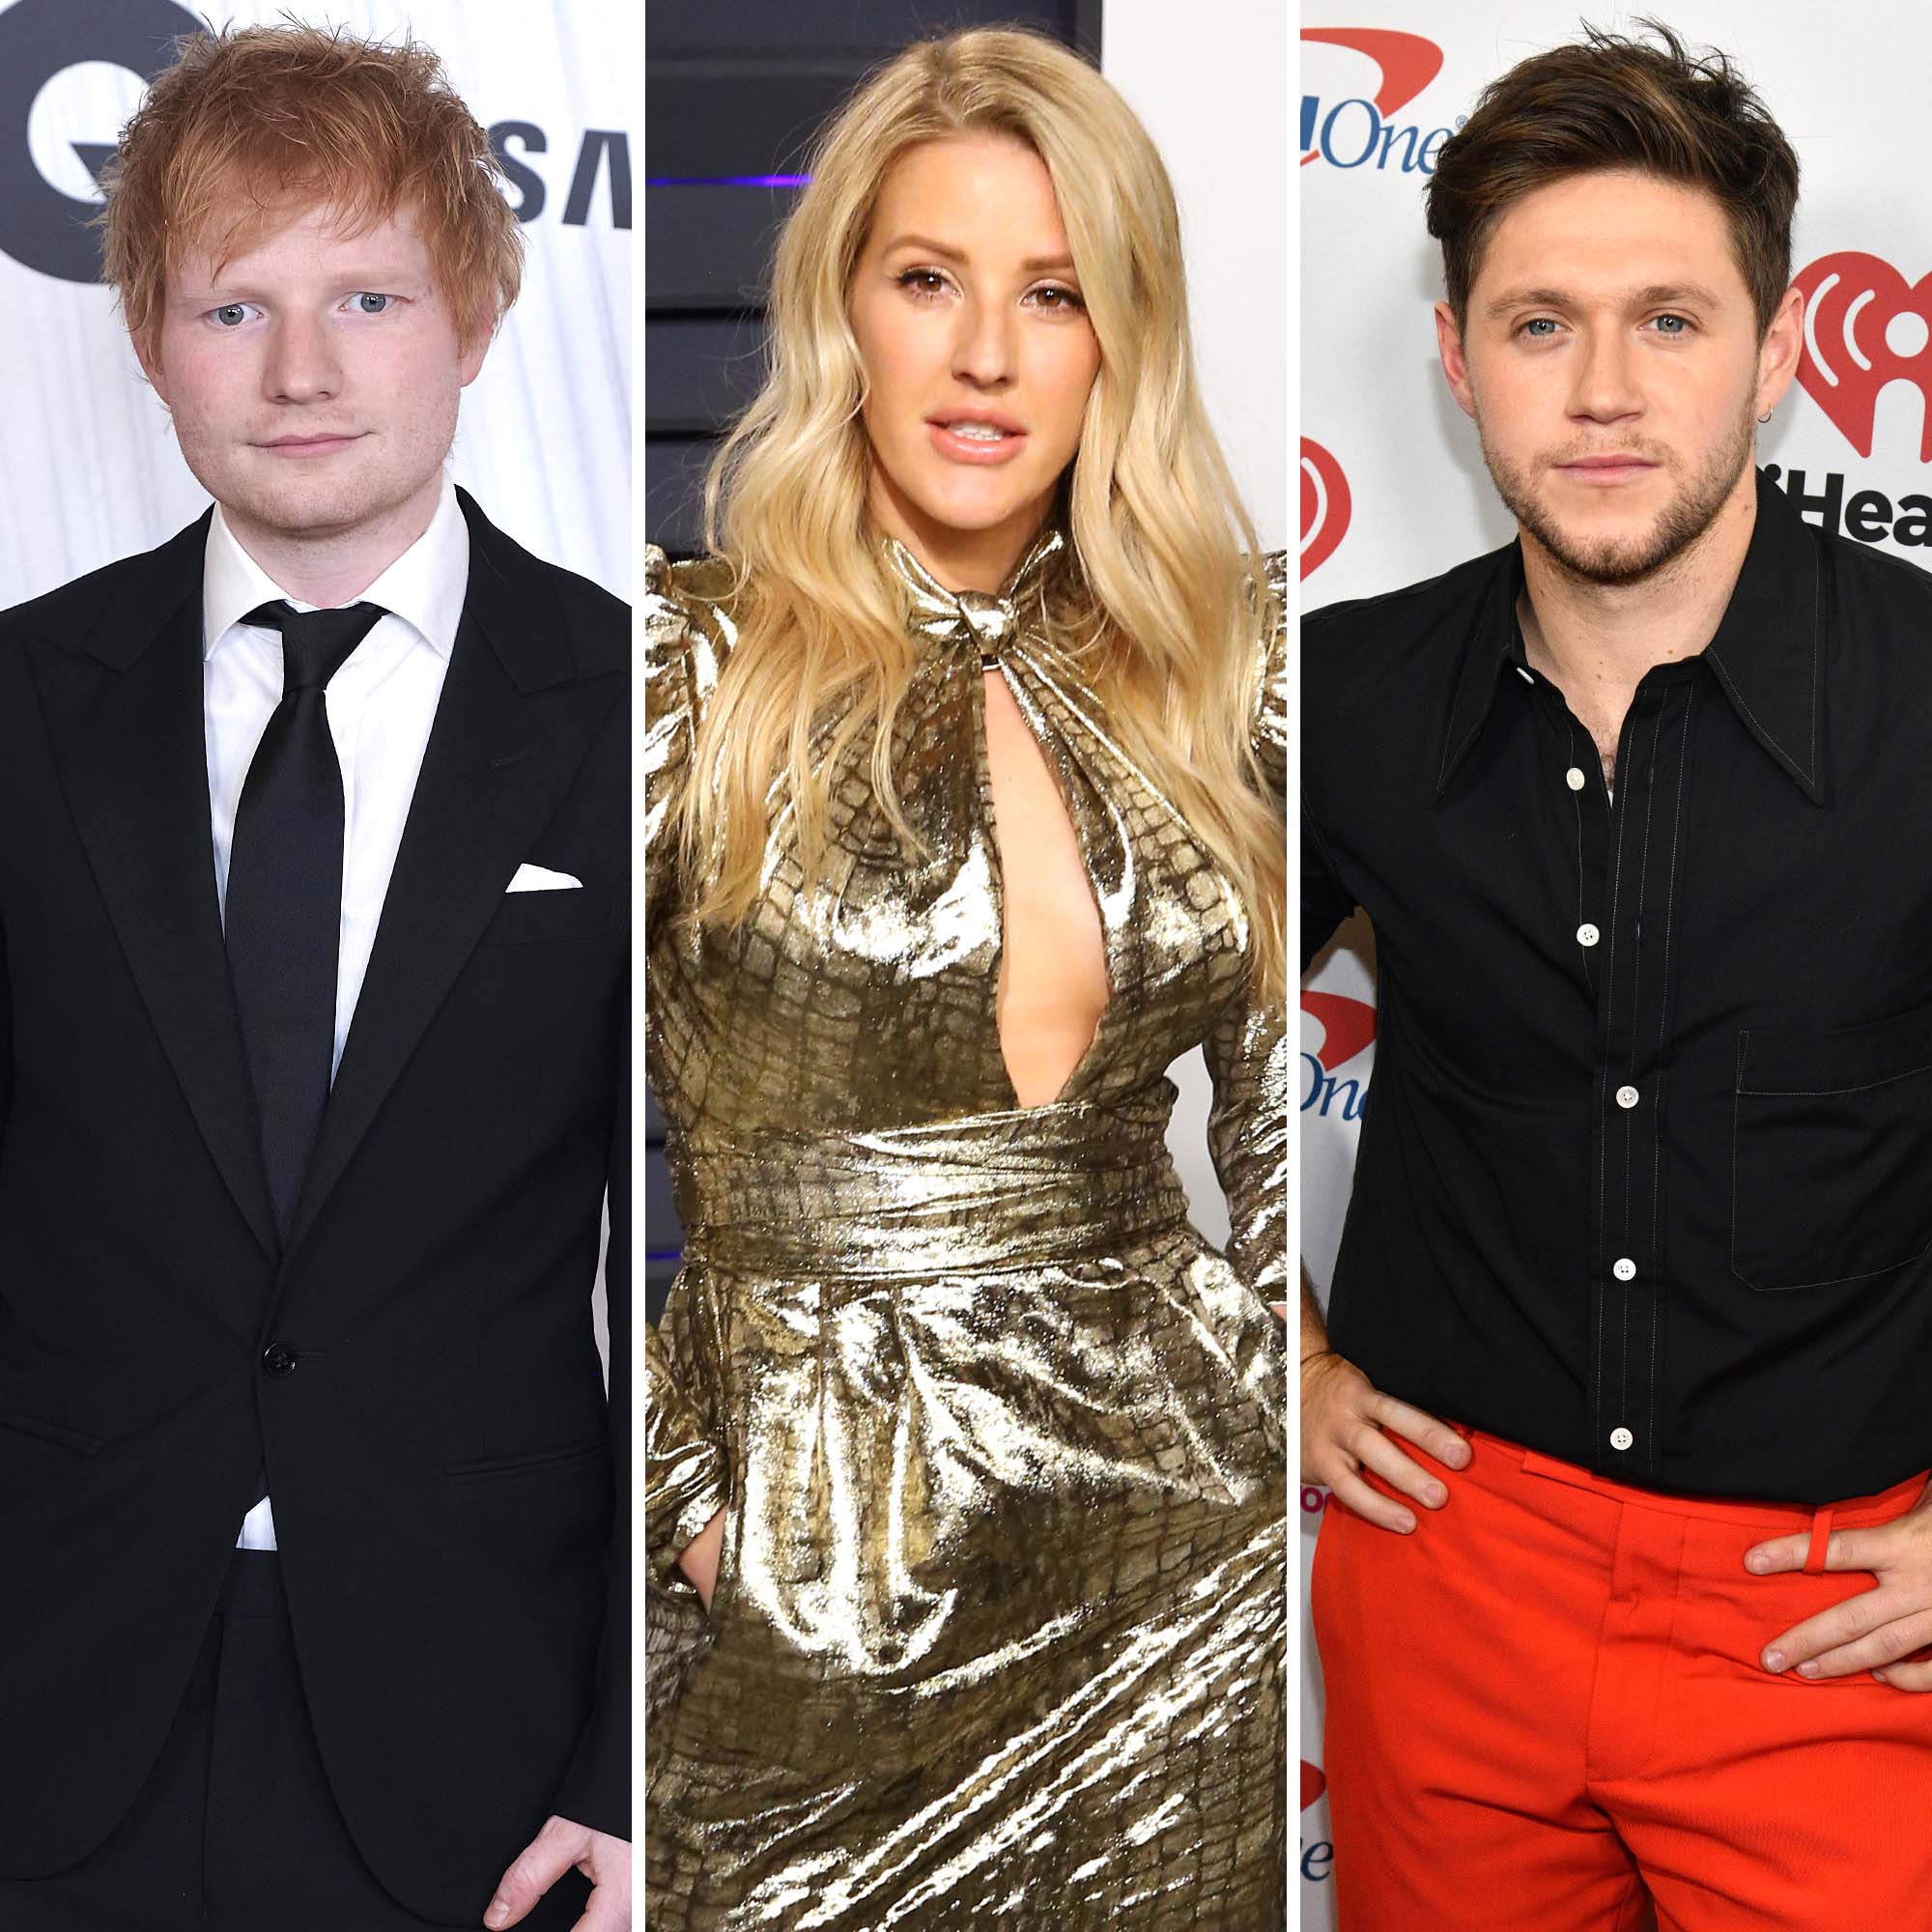 Ellie Goulding Reveals If She Cheated on Ed Sheeran With Niall Horan